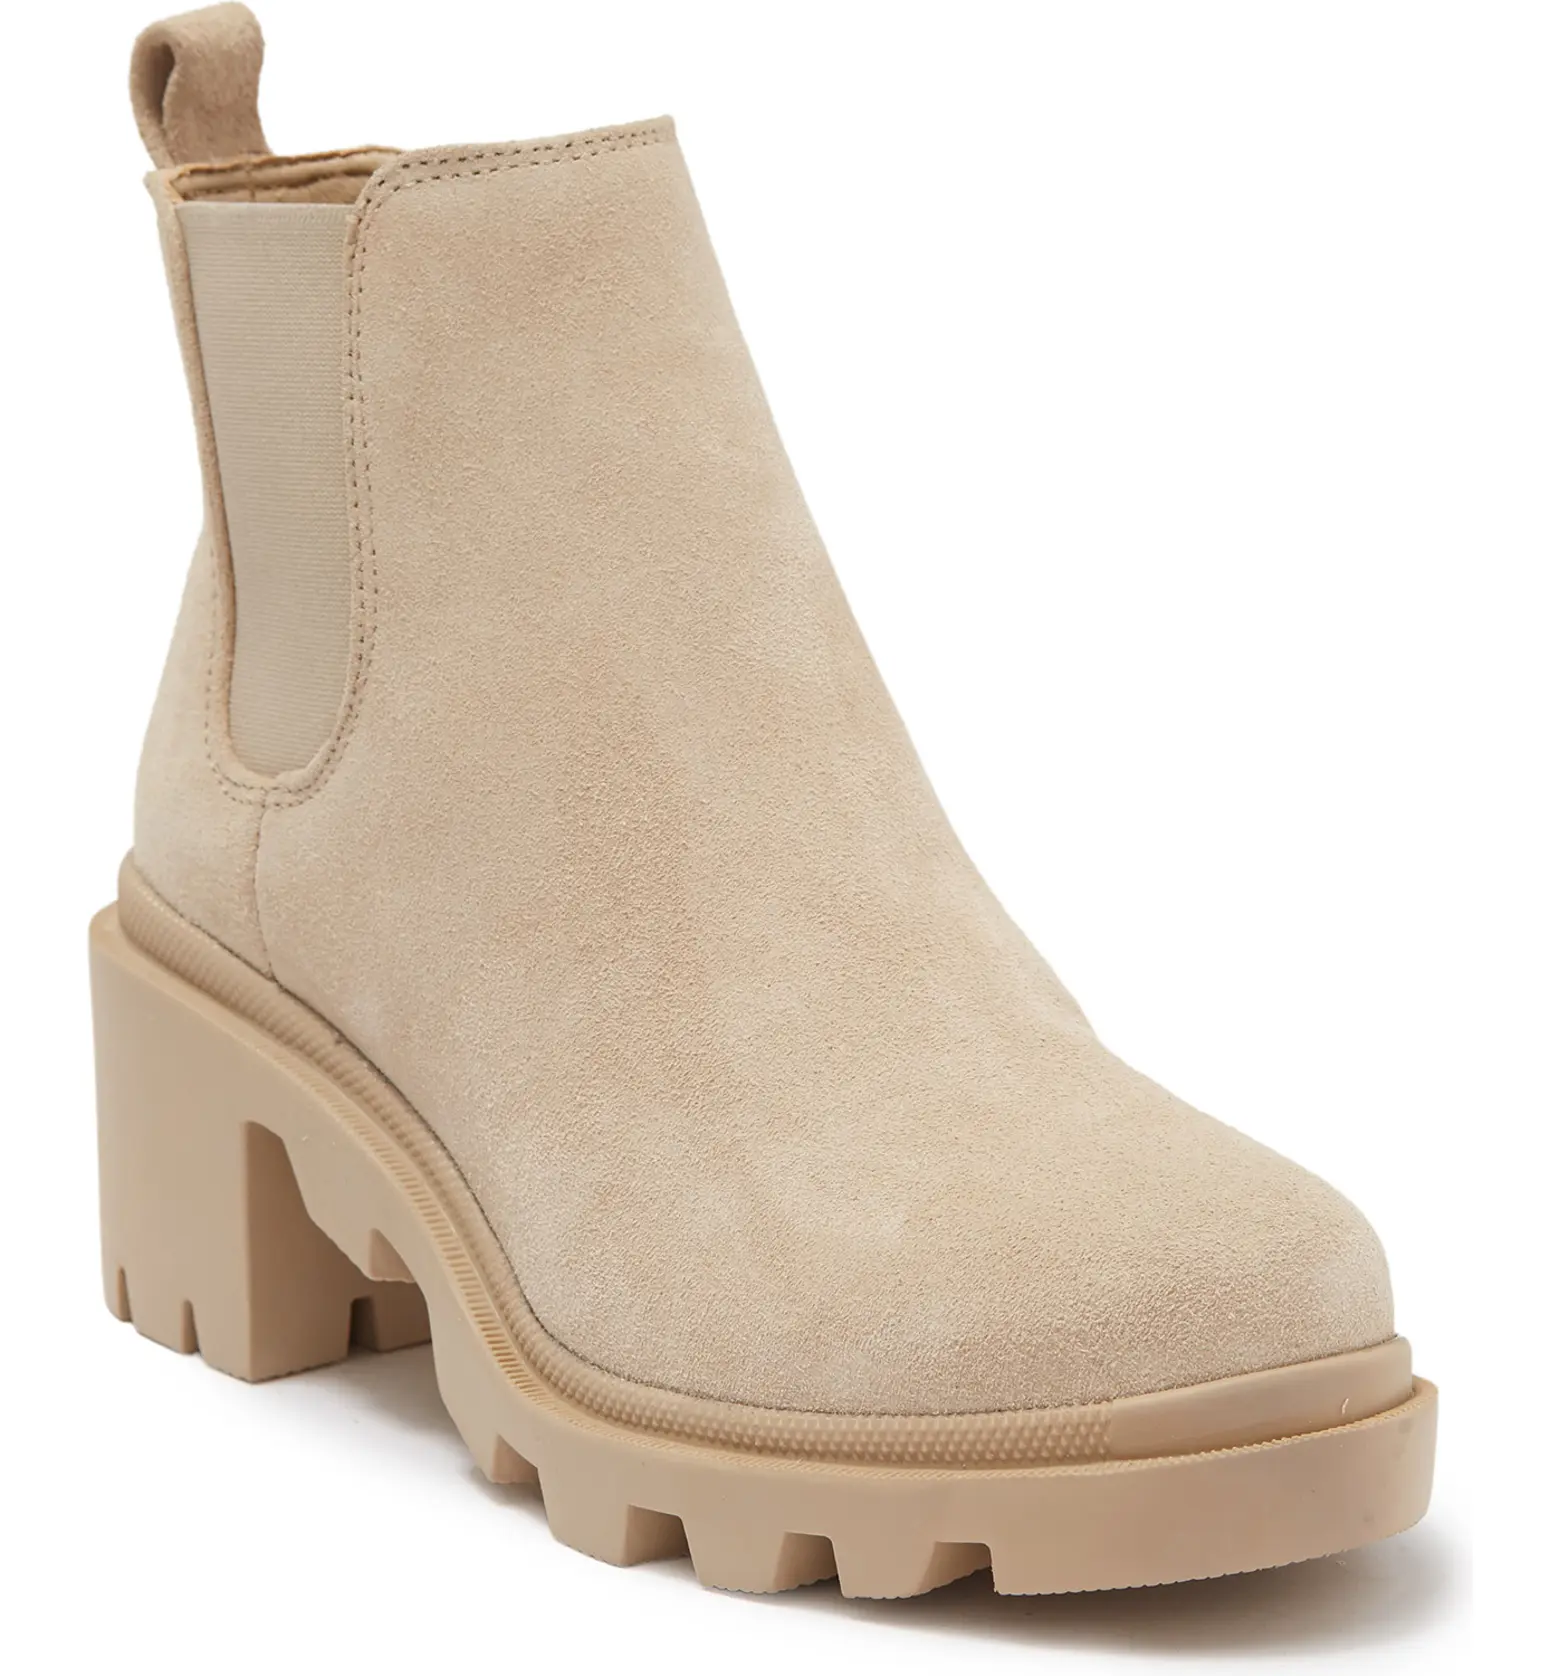 tan lug sole boots for 2022 holiday gift guide for women.